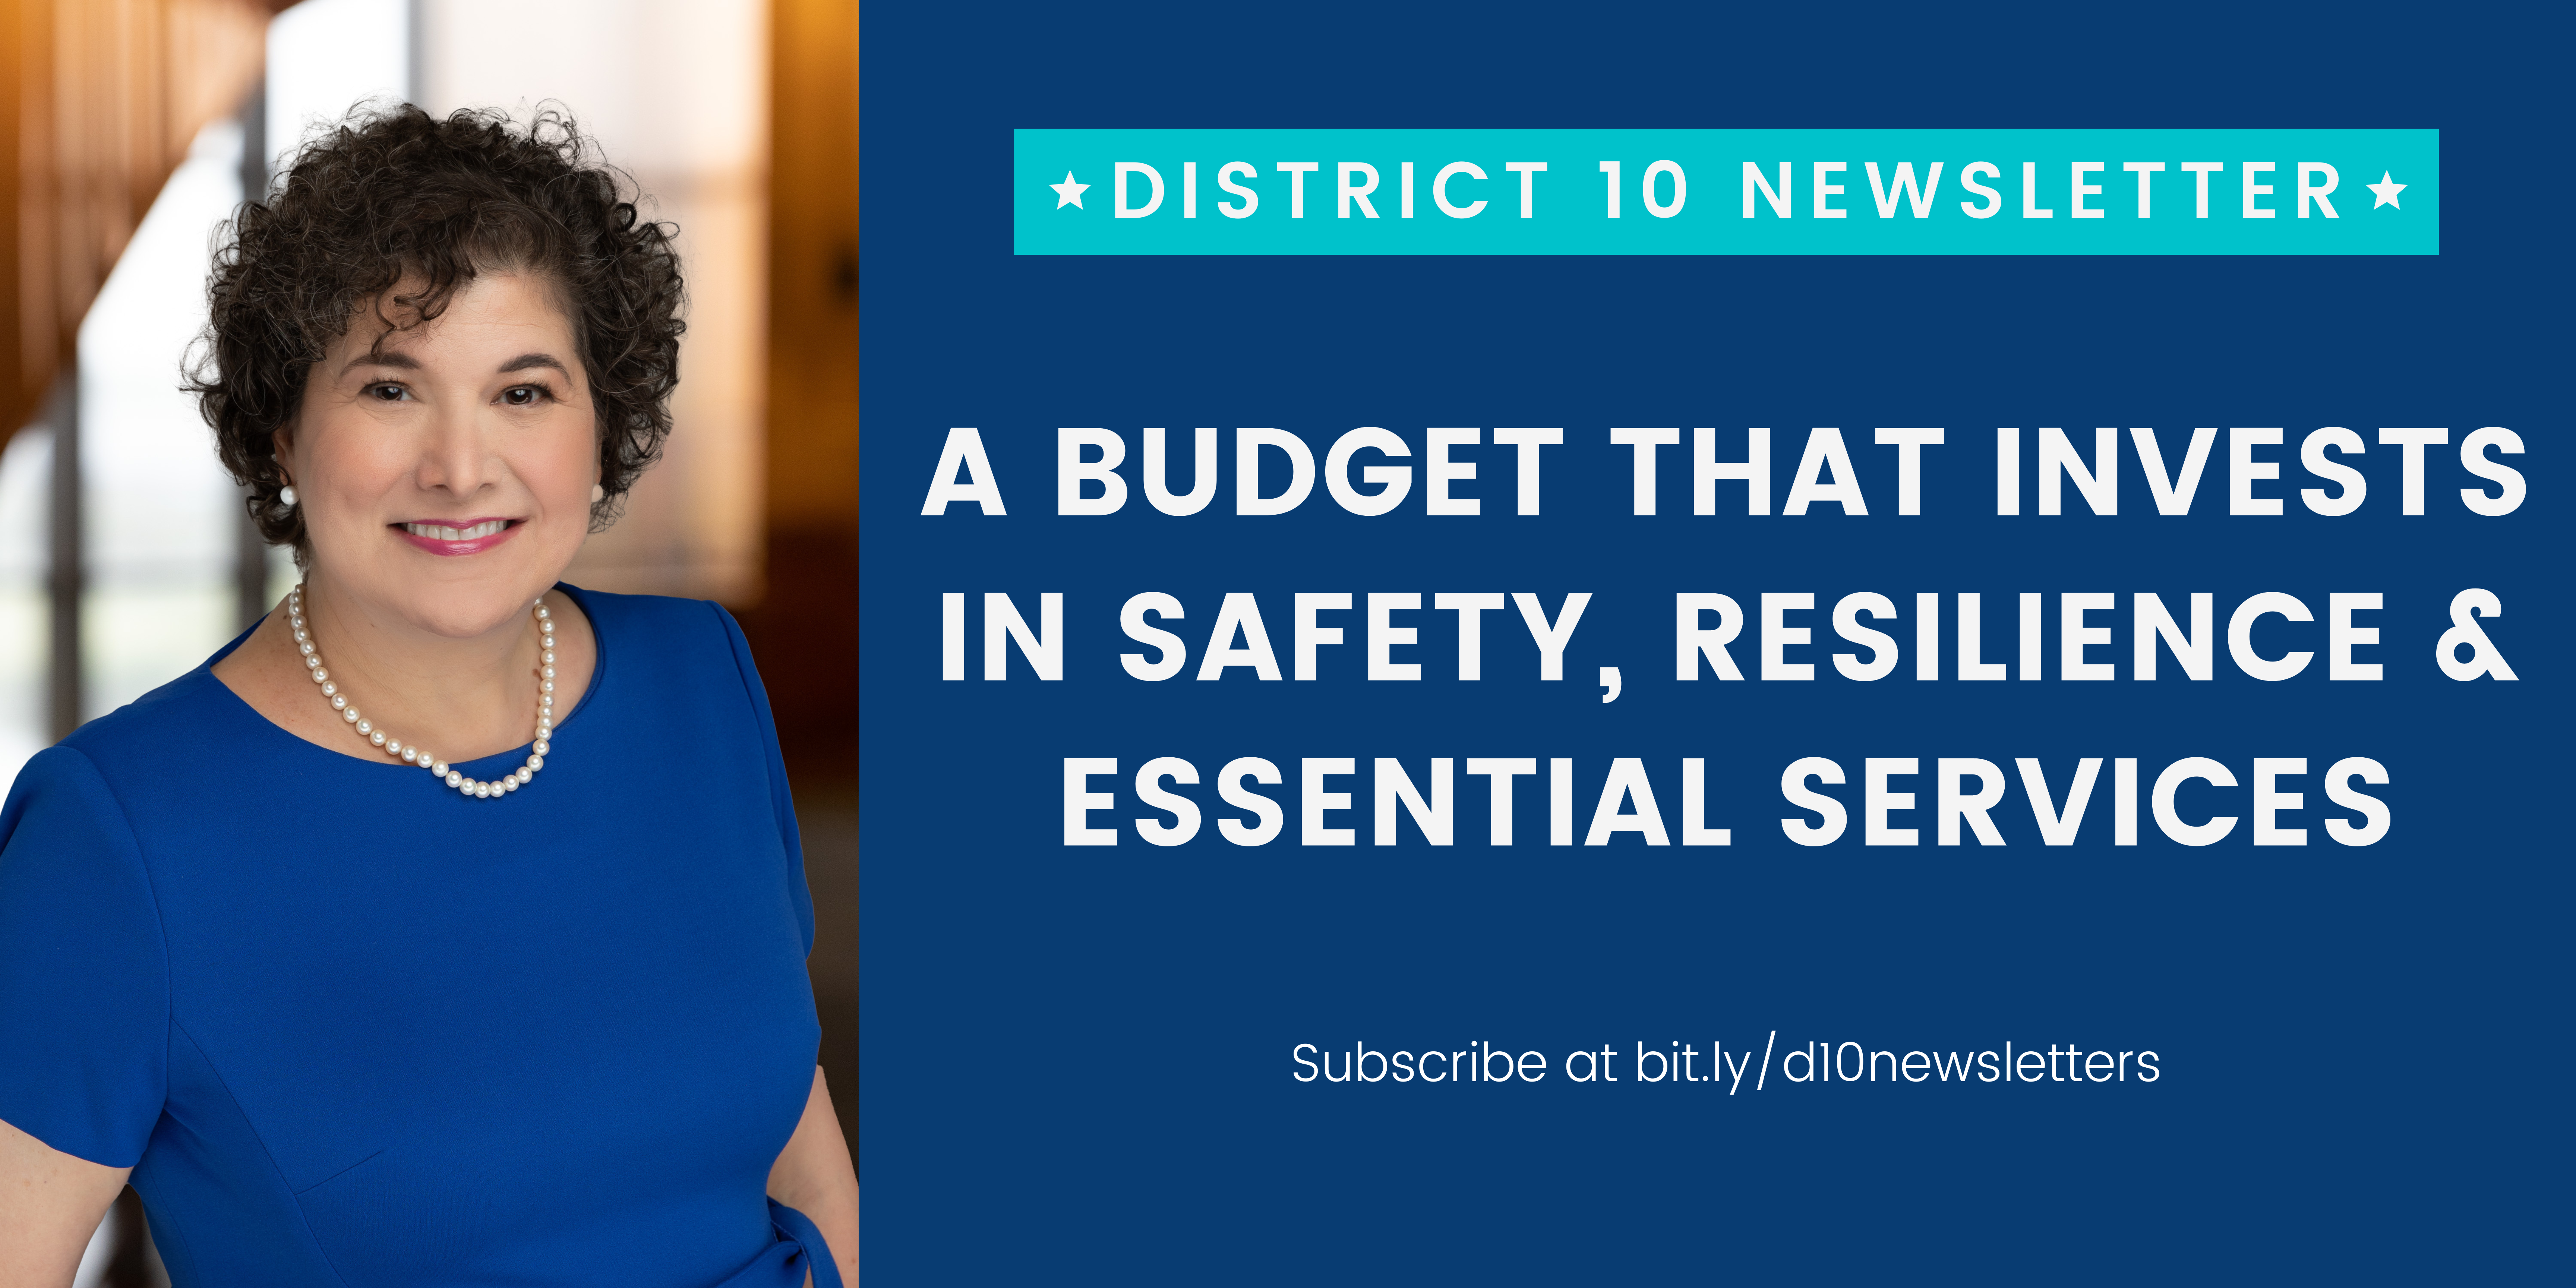 A Budget that Invests in Safety, Resilience and Essential Services